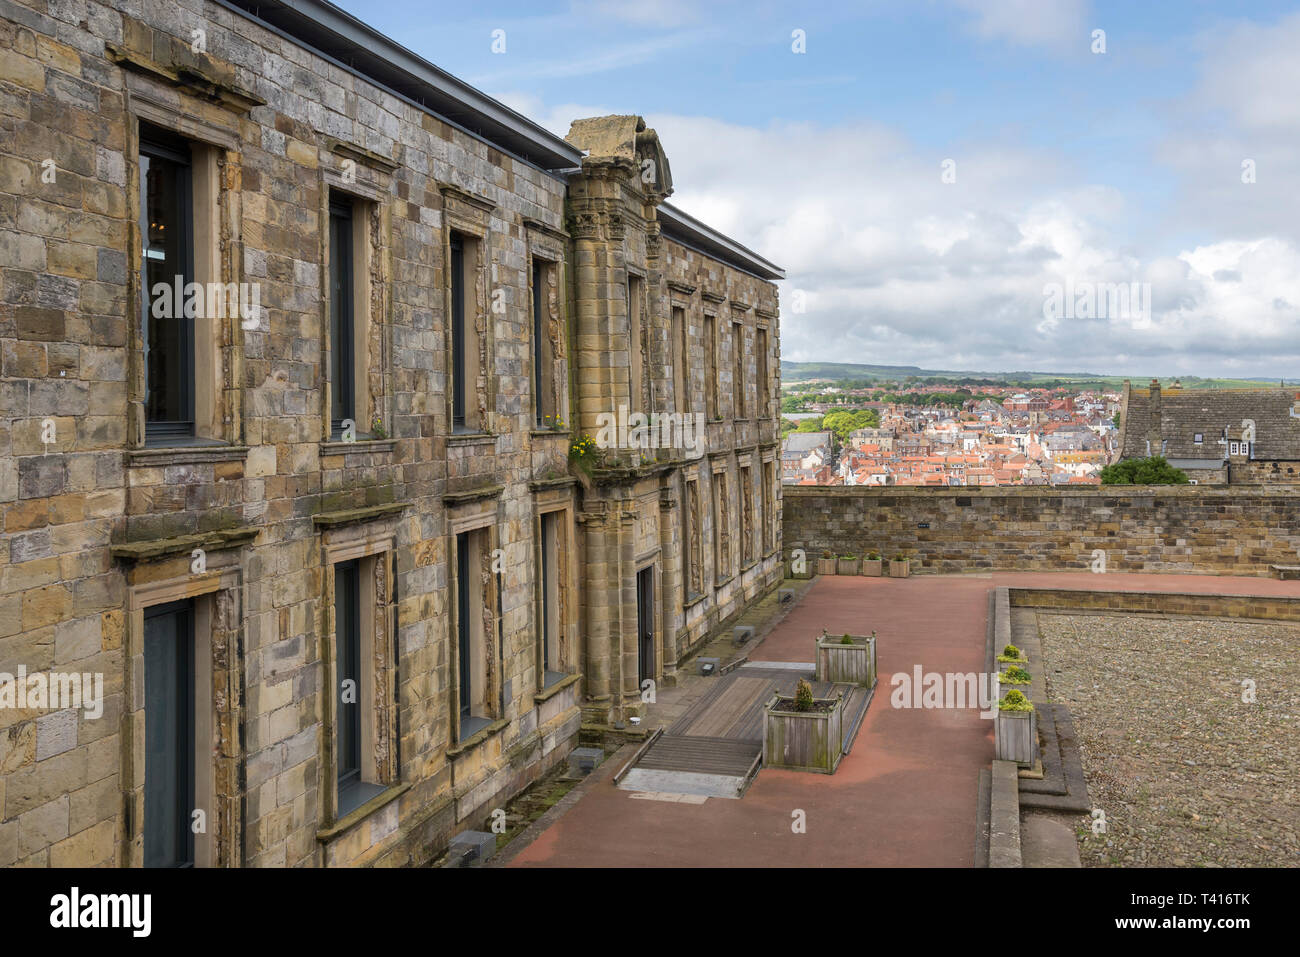 Cholmley House, an old banqueting house which now houses the museum for Whitby Abbey. A well known historical site on the coast of North Yorkshire. Stock Photo